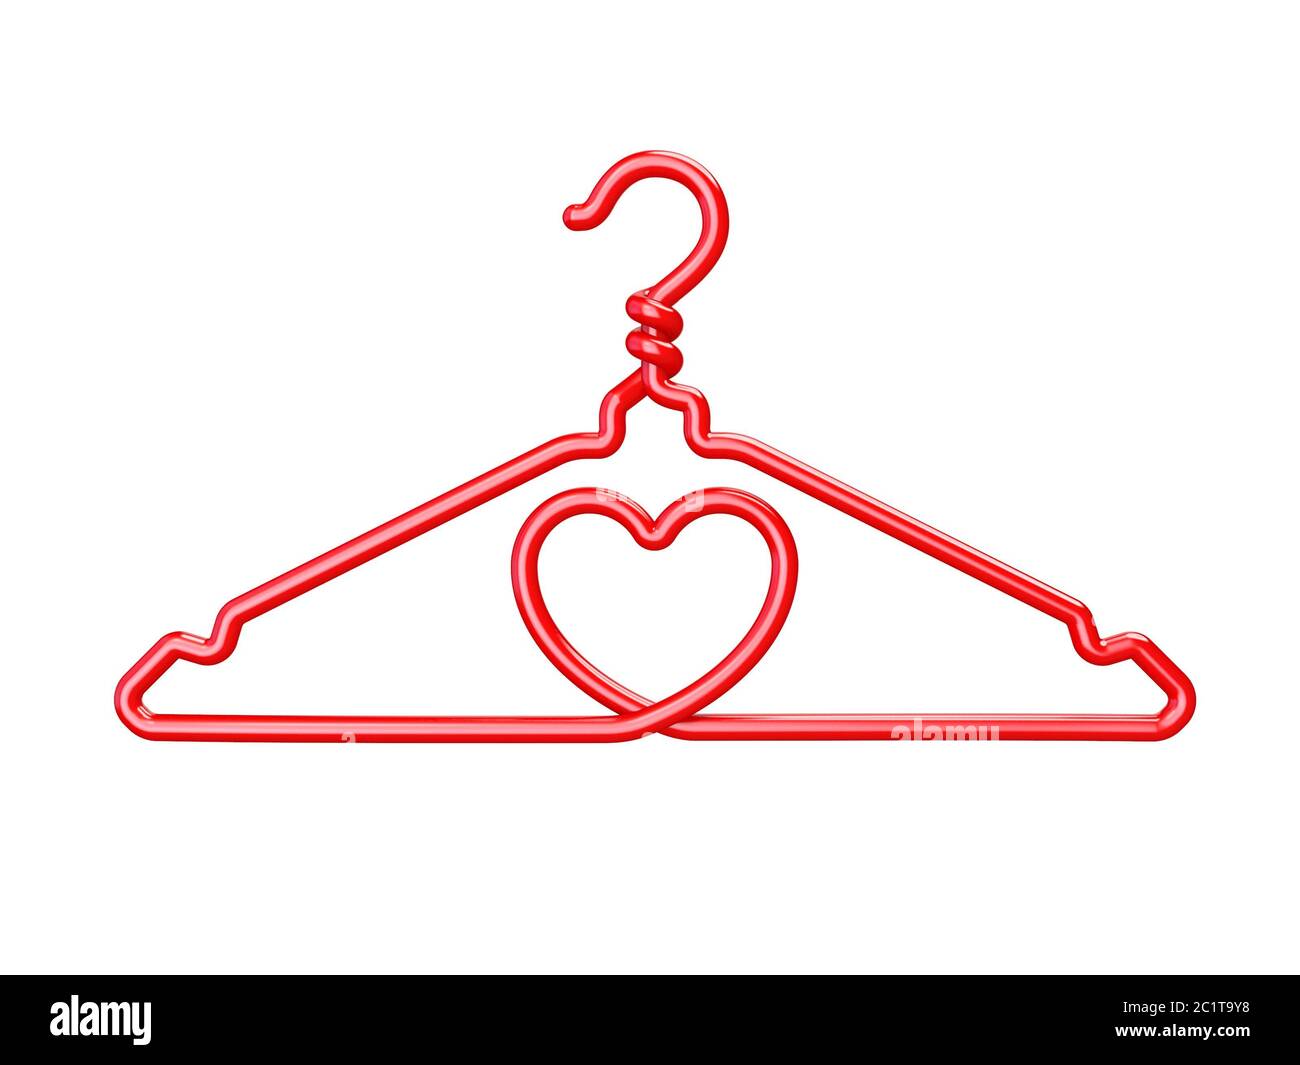 Red wire clothes hangers heart shaped 3D Stock Photo